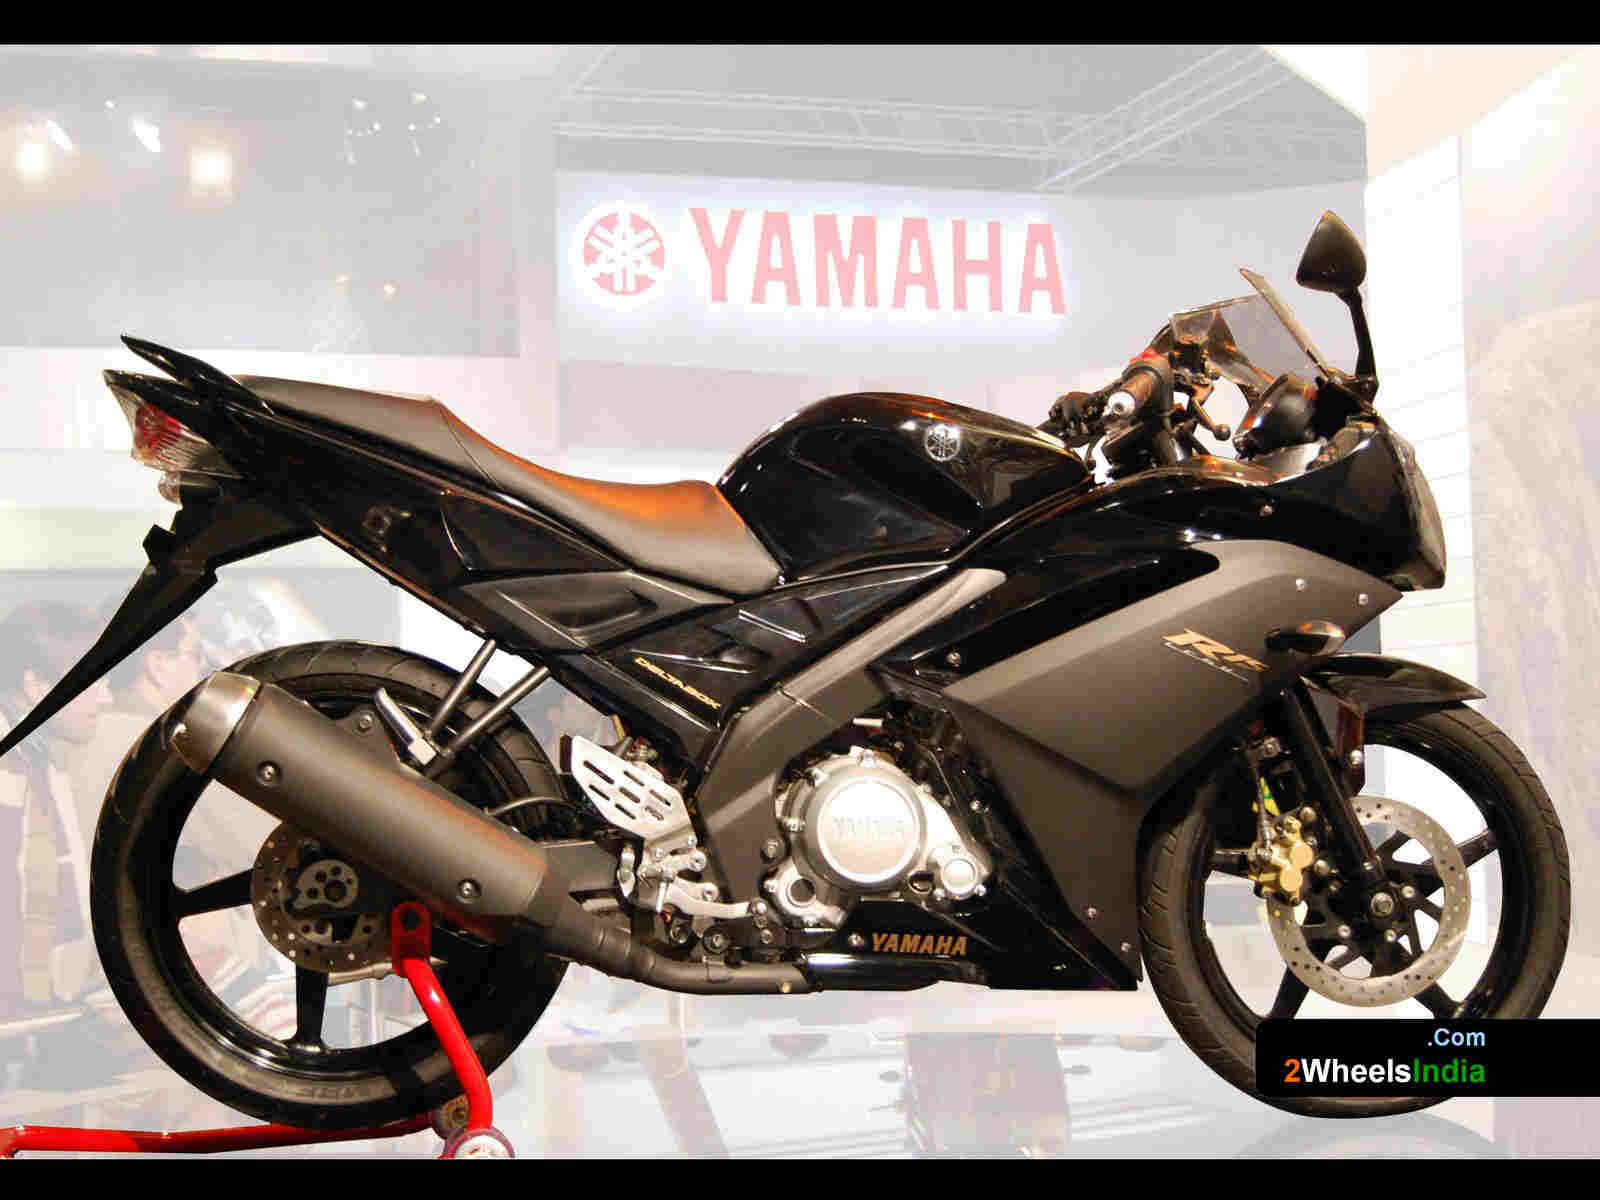 New yamaha bikes launching in India. News about upcoming ...